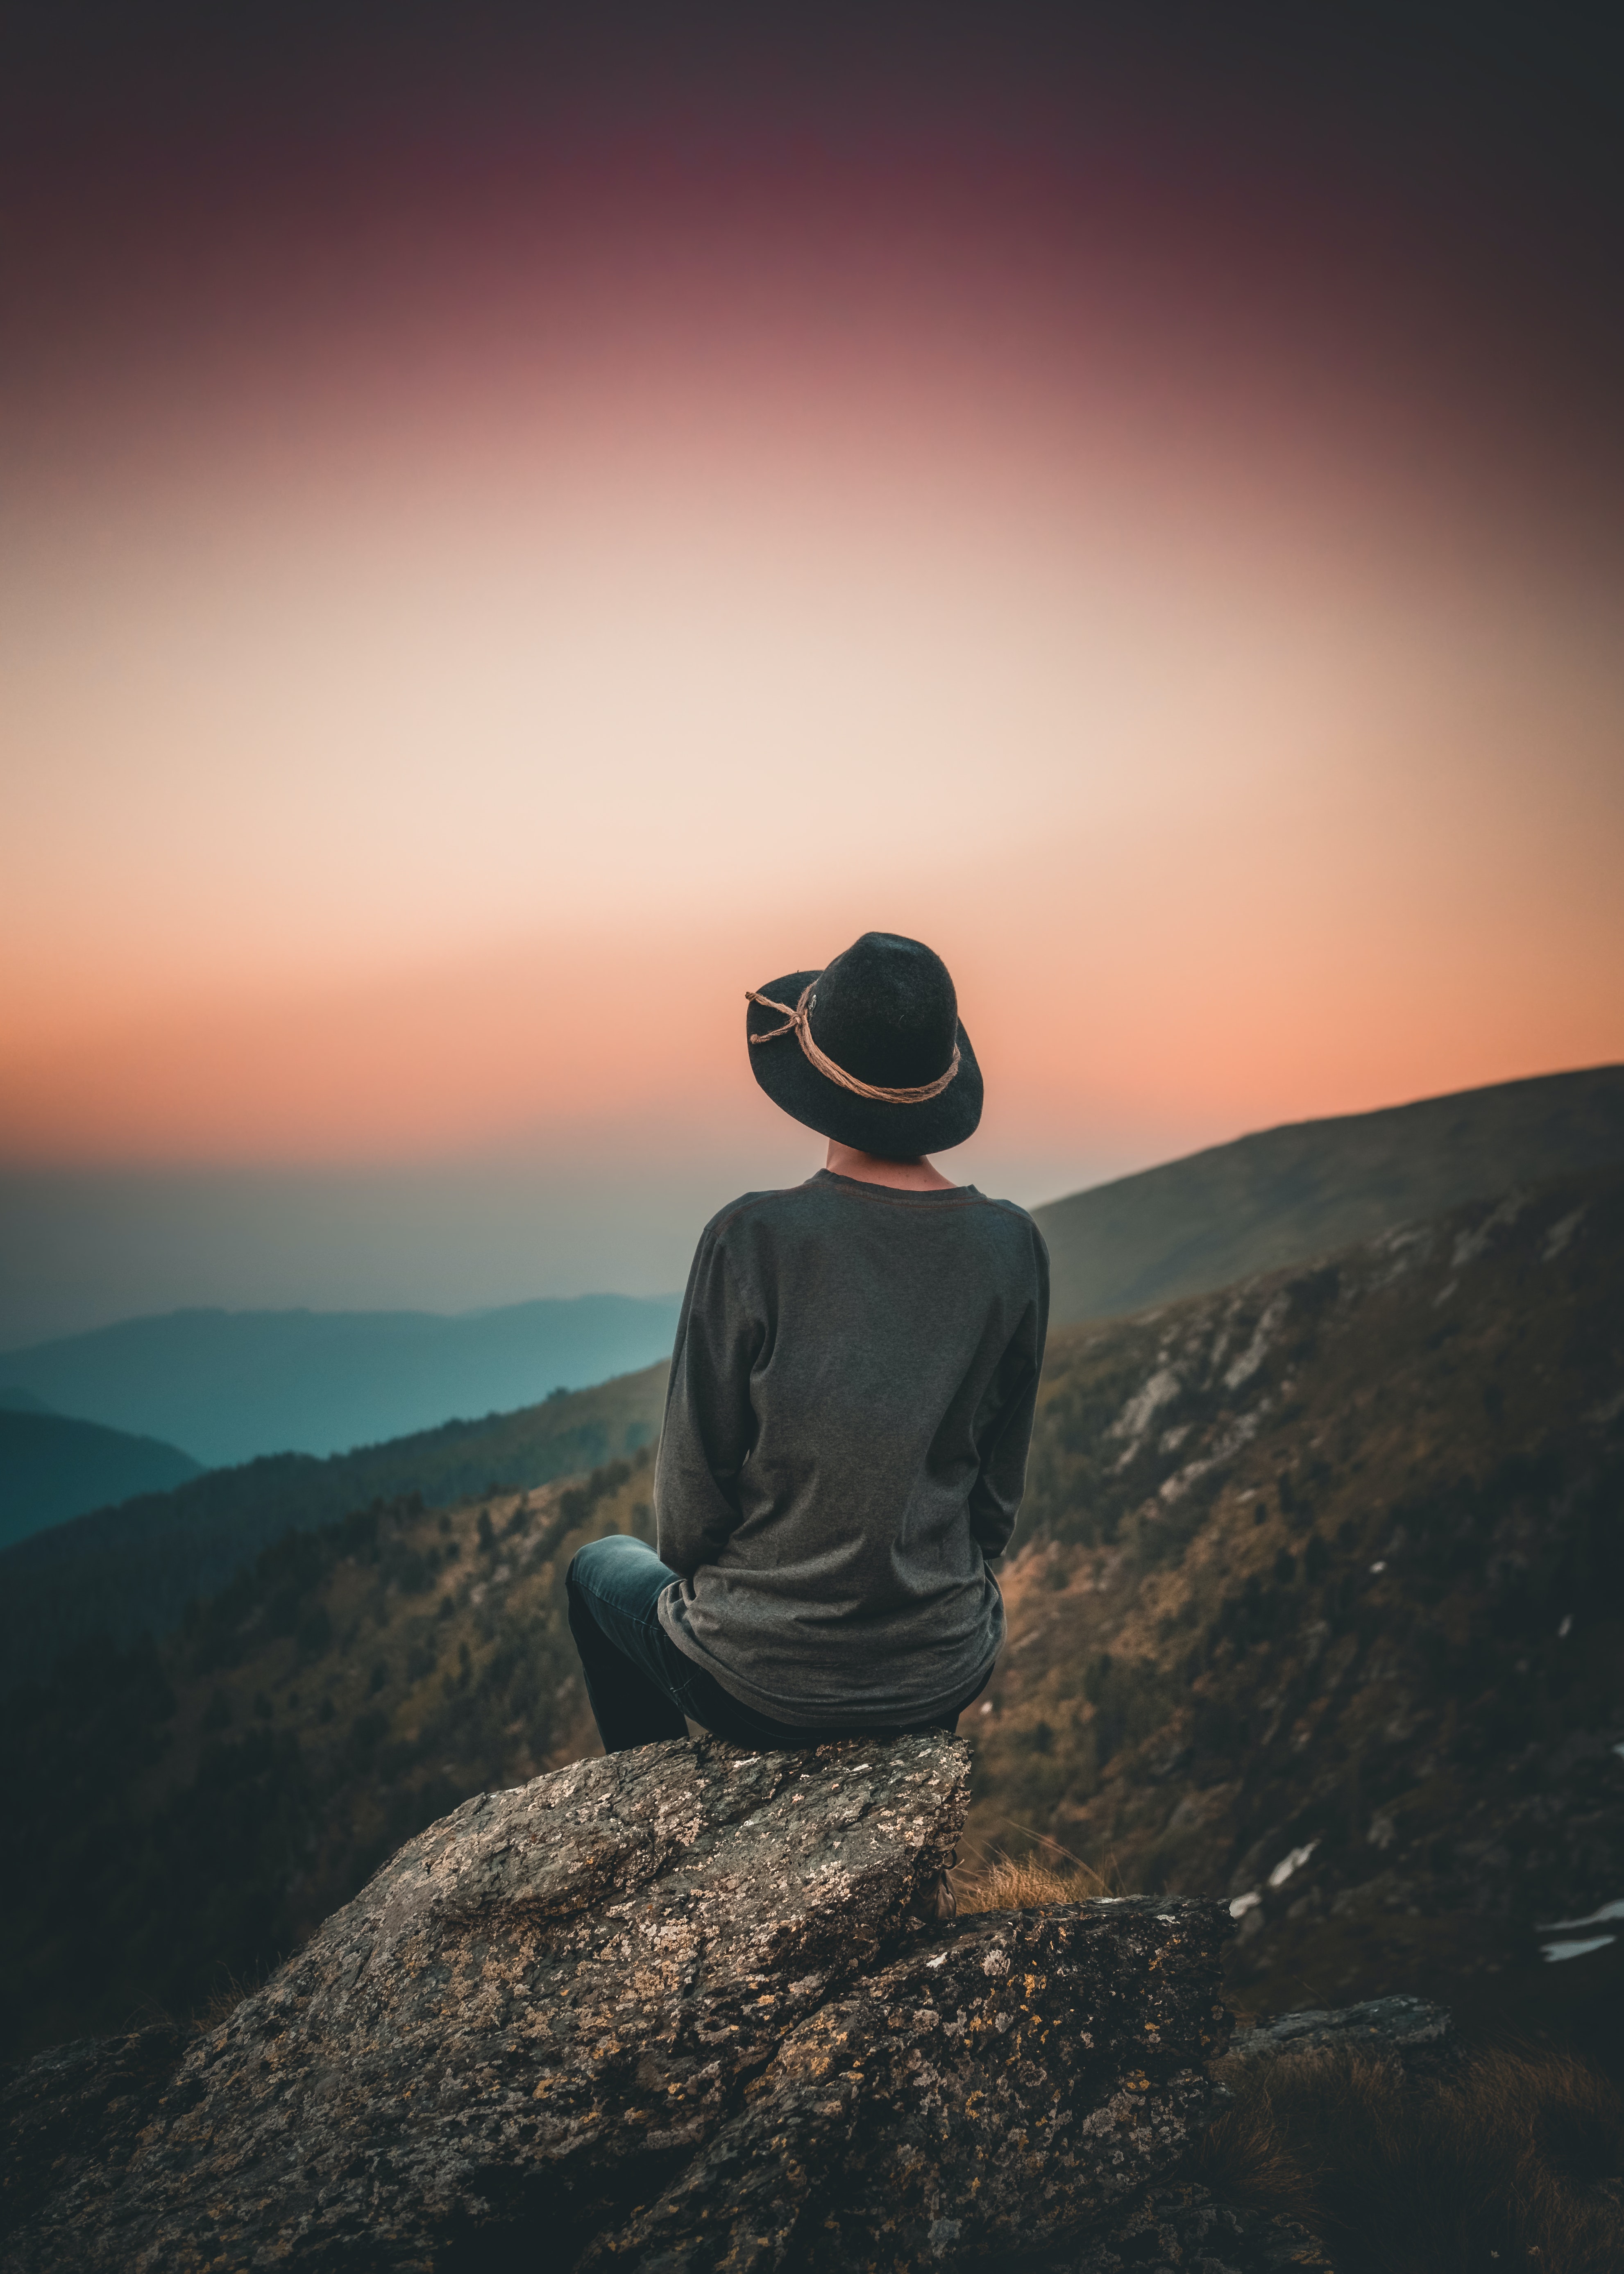 sitting person in hat contemplating a beautiful sunrise or sunset